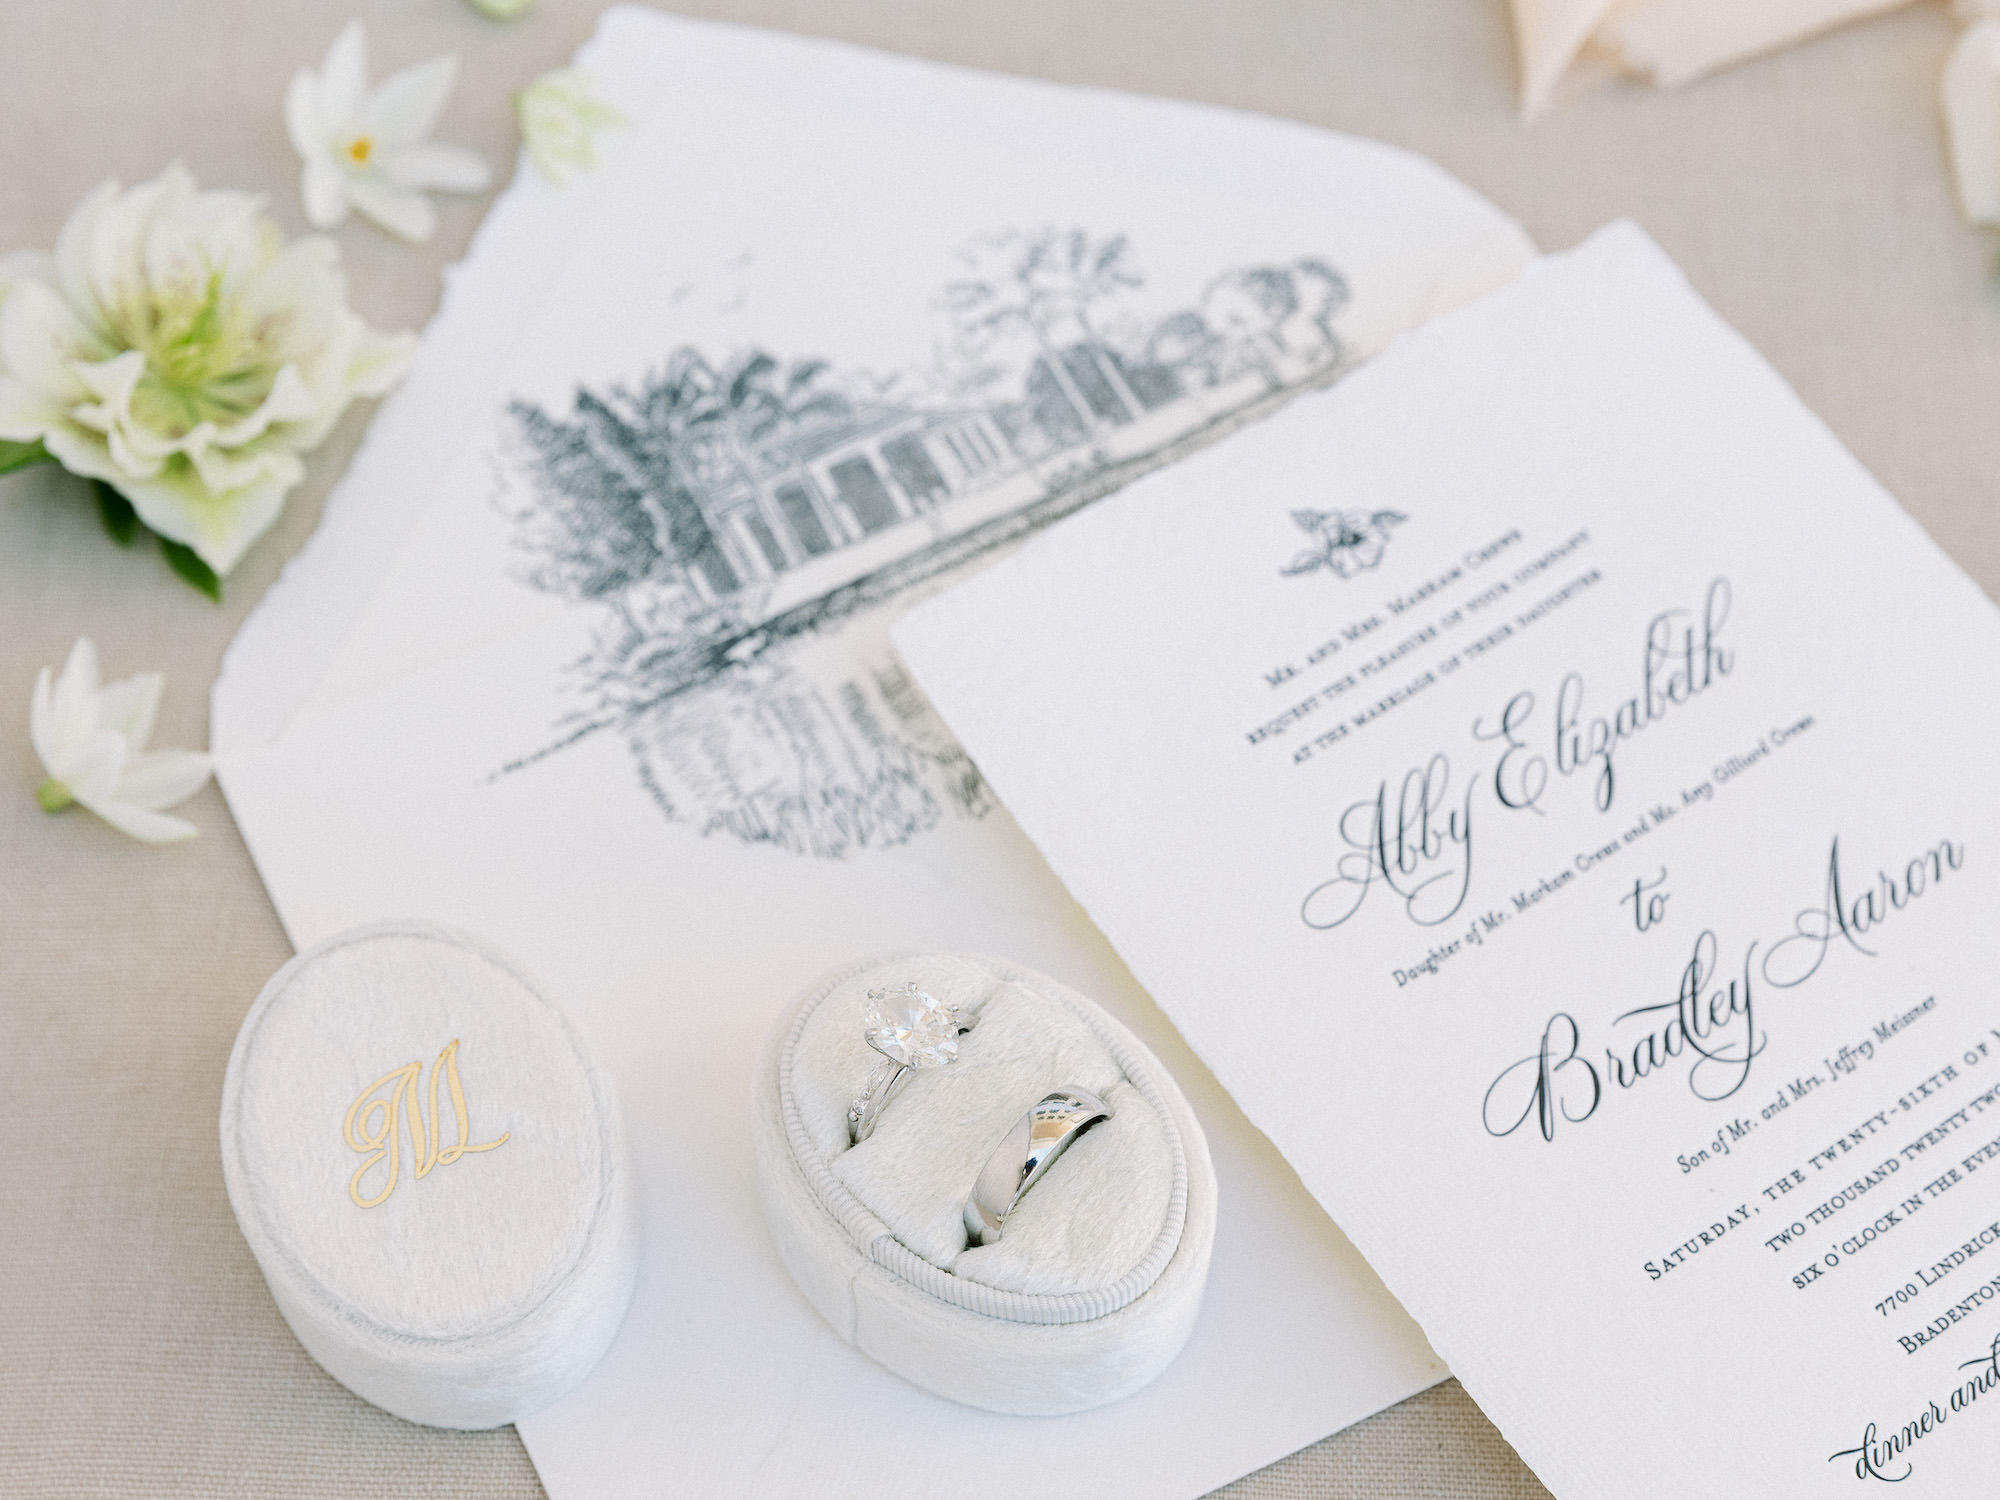 Old Florida Elegant Wedding, Oval Diamond Engagement Ring, Groom White Gold Wedding Ring in Oval Gray Ring Box, White and Gray Wedding Invitation Suite | Tampa Bay Wedding Stationery A&P Design Co